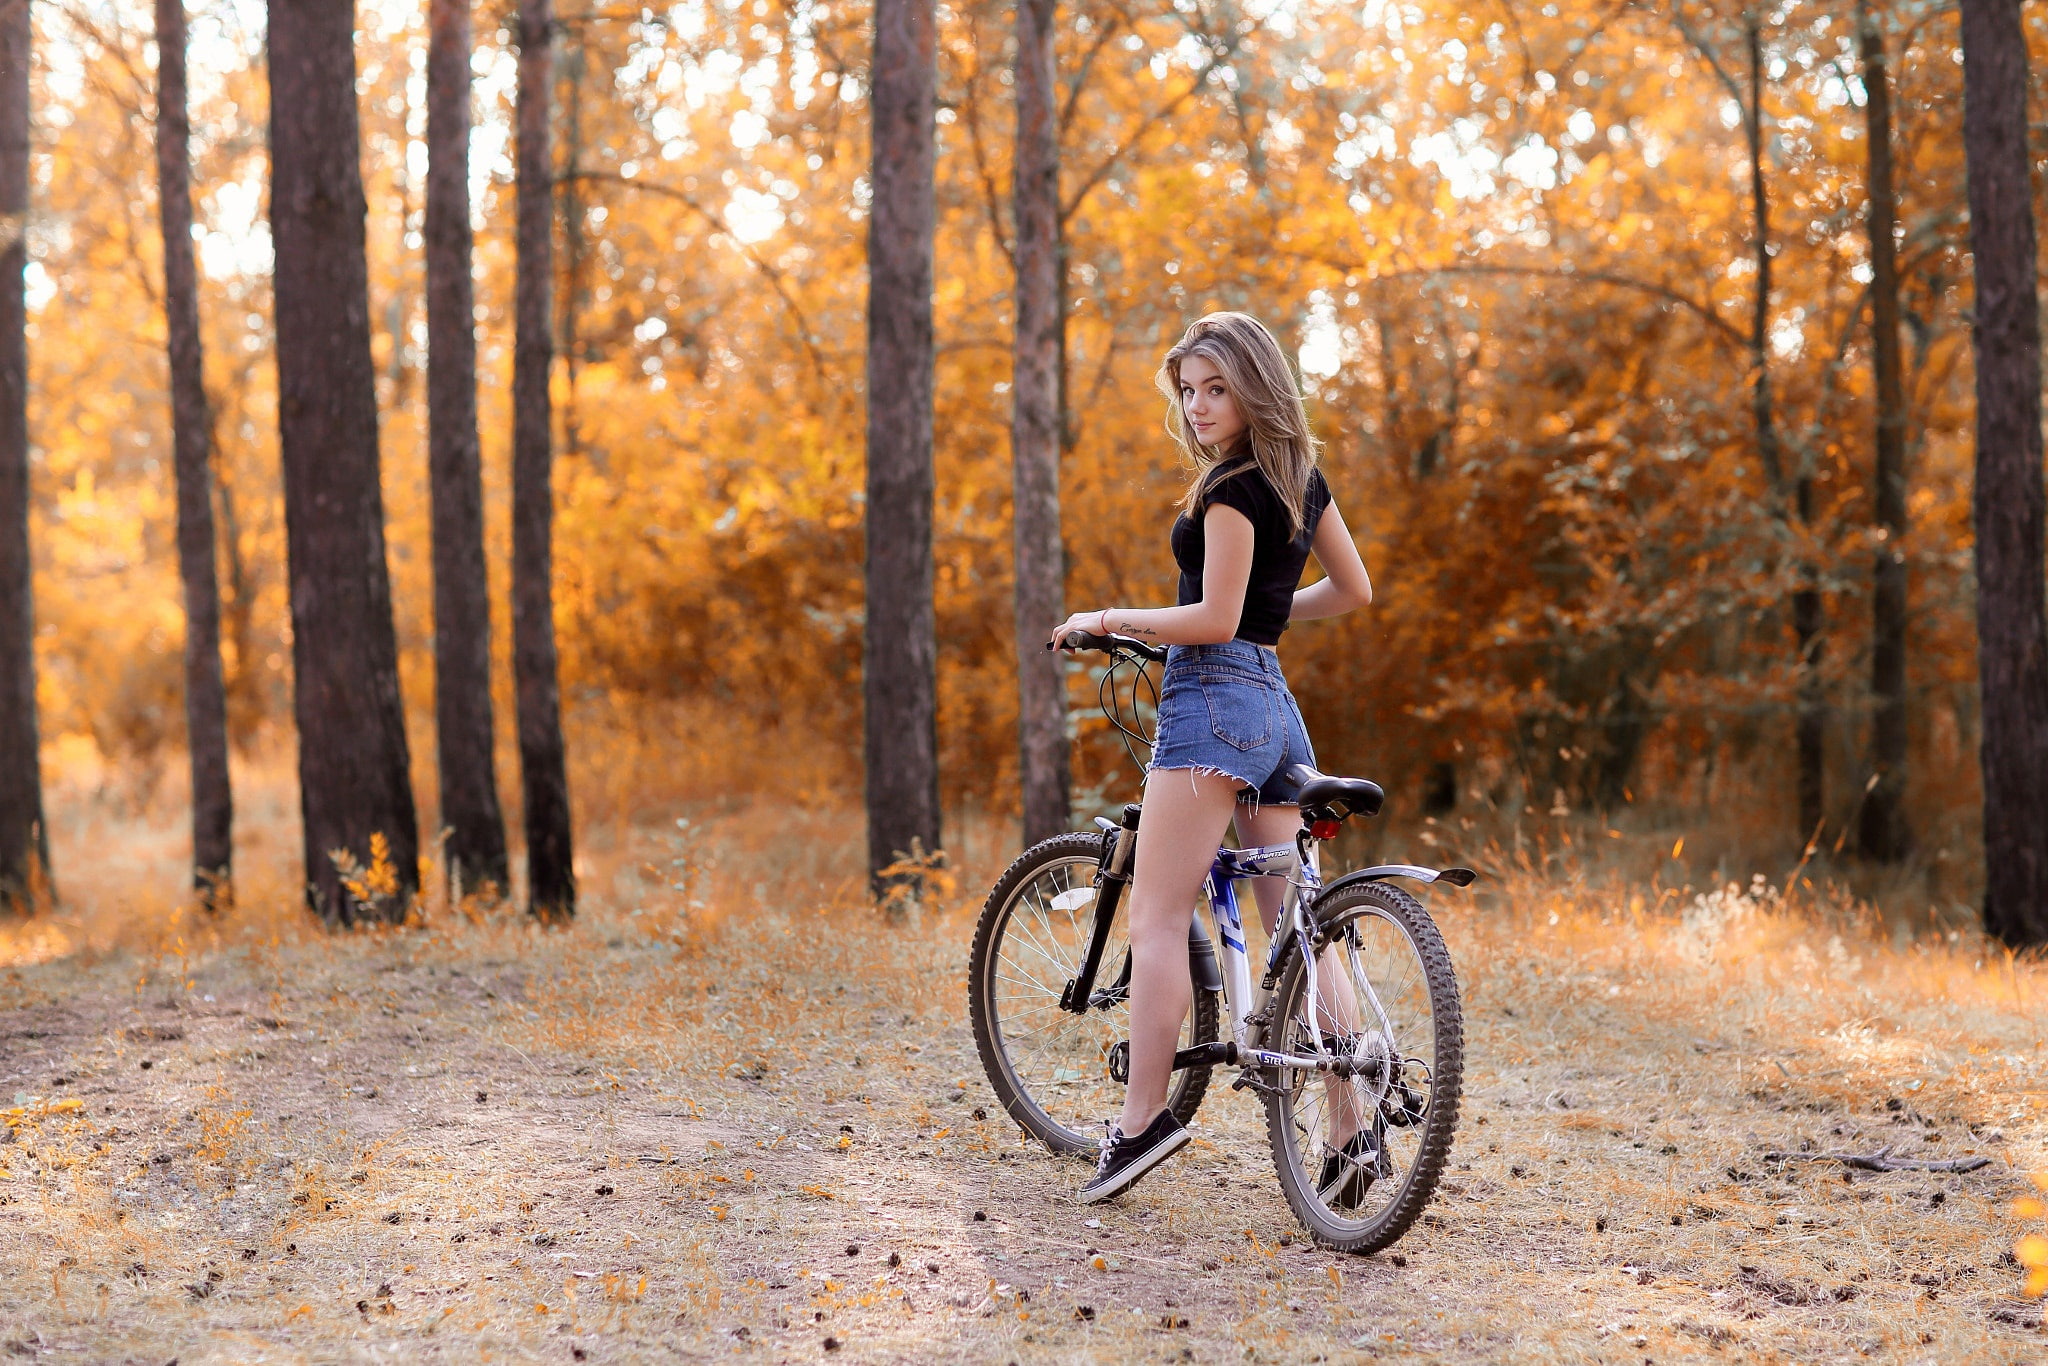 autumn, forest, girl, trees, nature, bike, Park, mood, stay